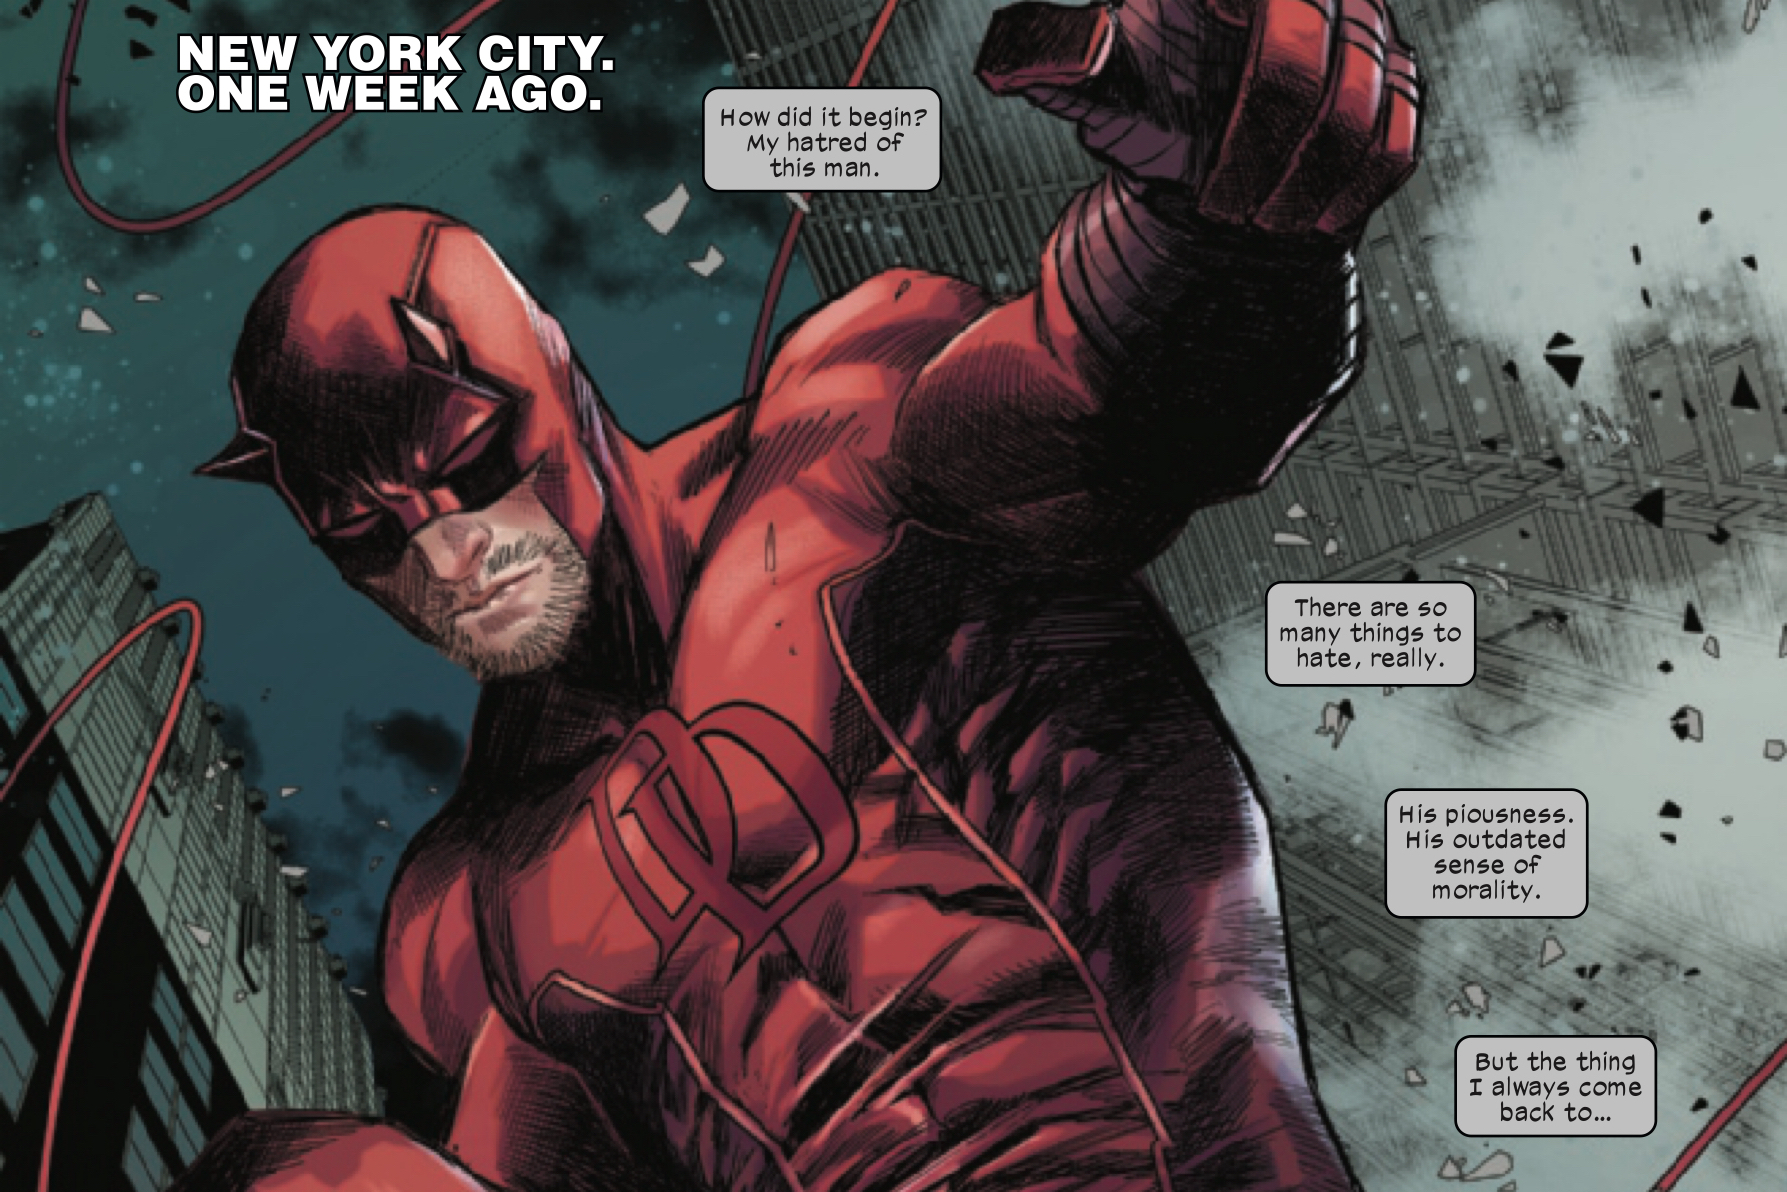 Daredevil swings through NYC as Wilson Fisk monologues about how much he hates him in Devil’s Reign #1 (2021).